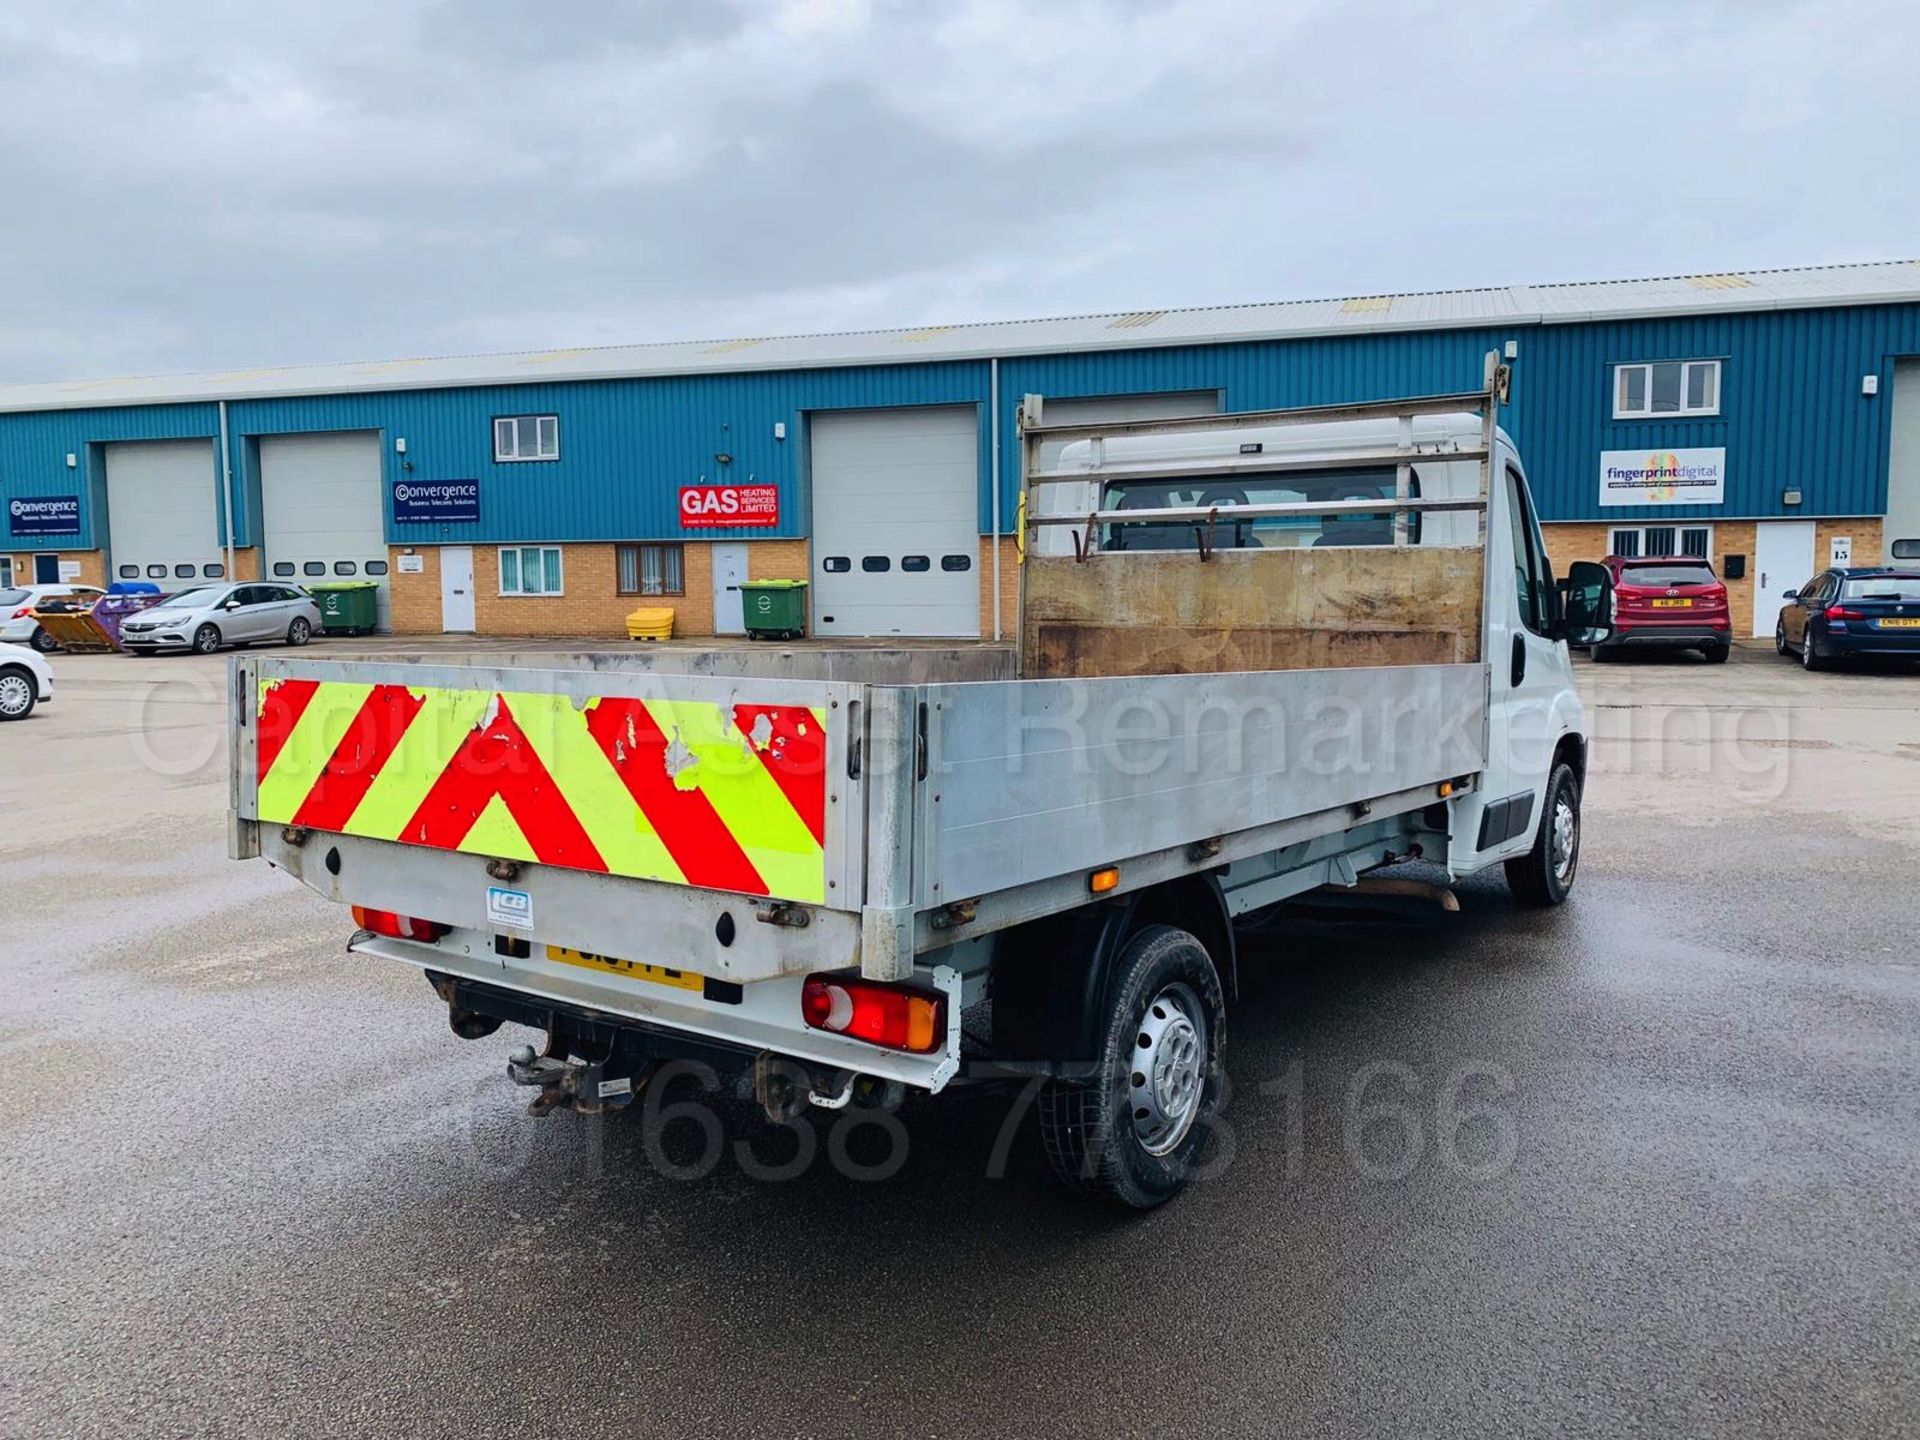 (ON SALE) CITROEN RELAY 35 *L3 - LWB 'ALLOY' DROPSIDE TRUCK* (2016) '2.2 HDI - 130 BHP' *LOW MILES* - Image 6 of 27